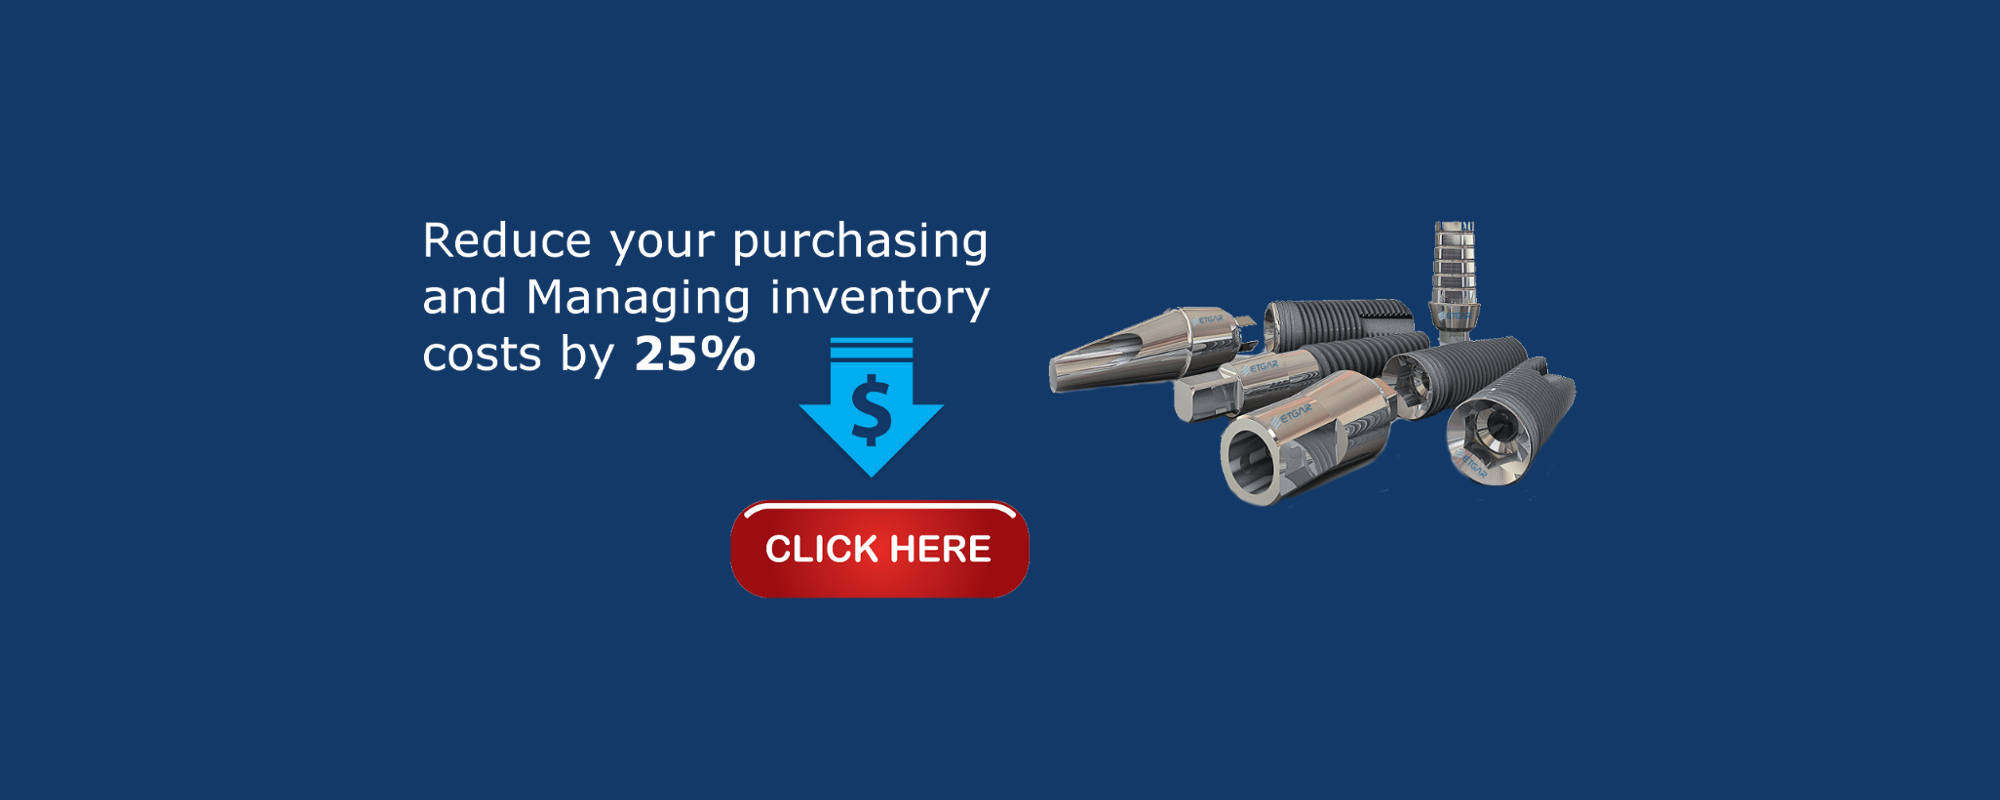 How would you like to reduce your Purchasing and Managing inventory costs by 25%?